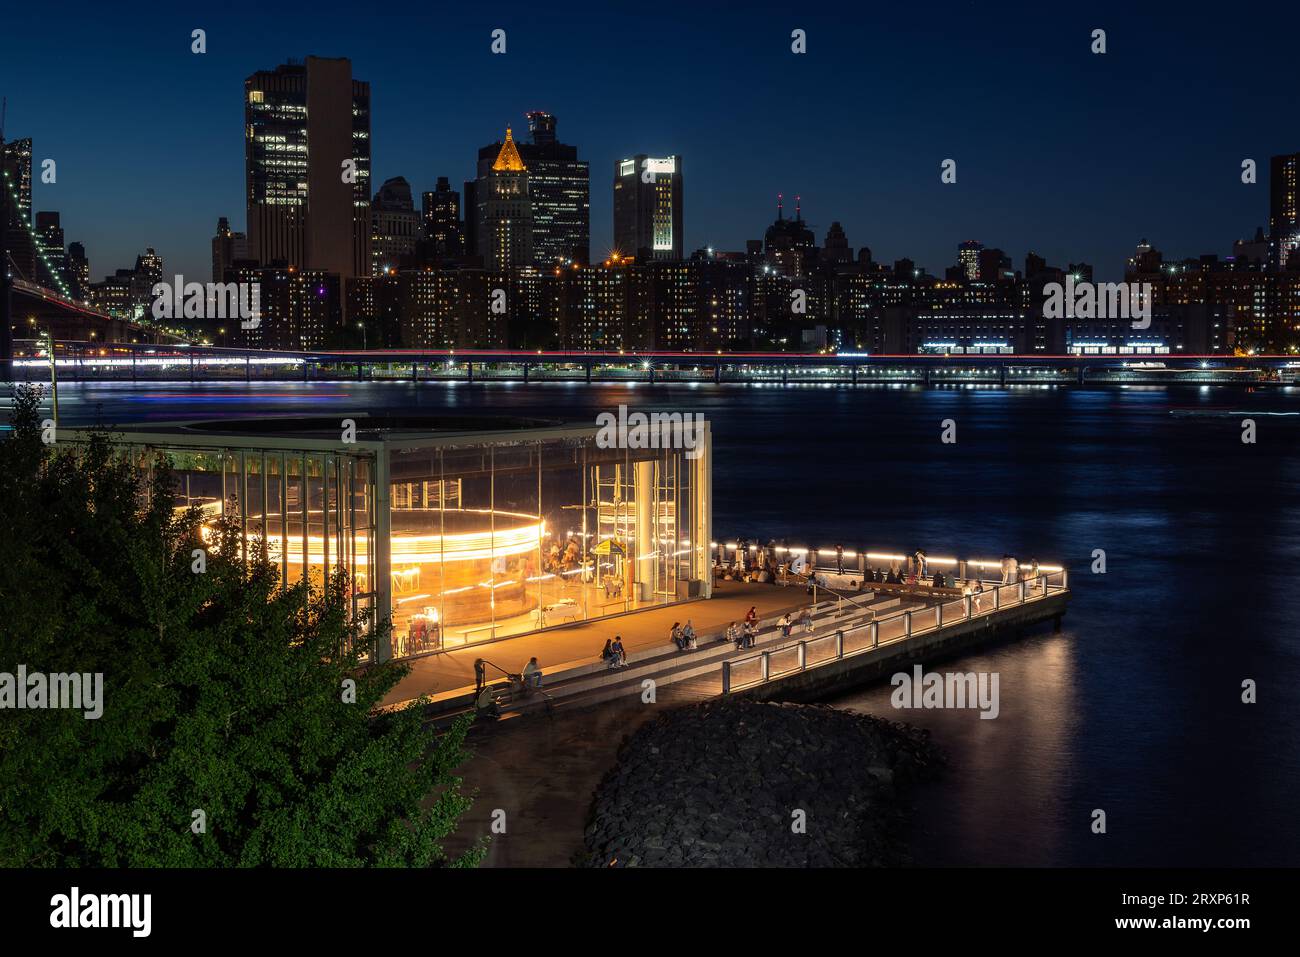 unique view about the Jane's carousel in Brooklyn bridge park in blue hour. Manhattan's Two bridges area and East river on the foreground. Stock Photo